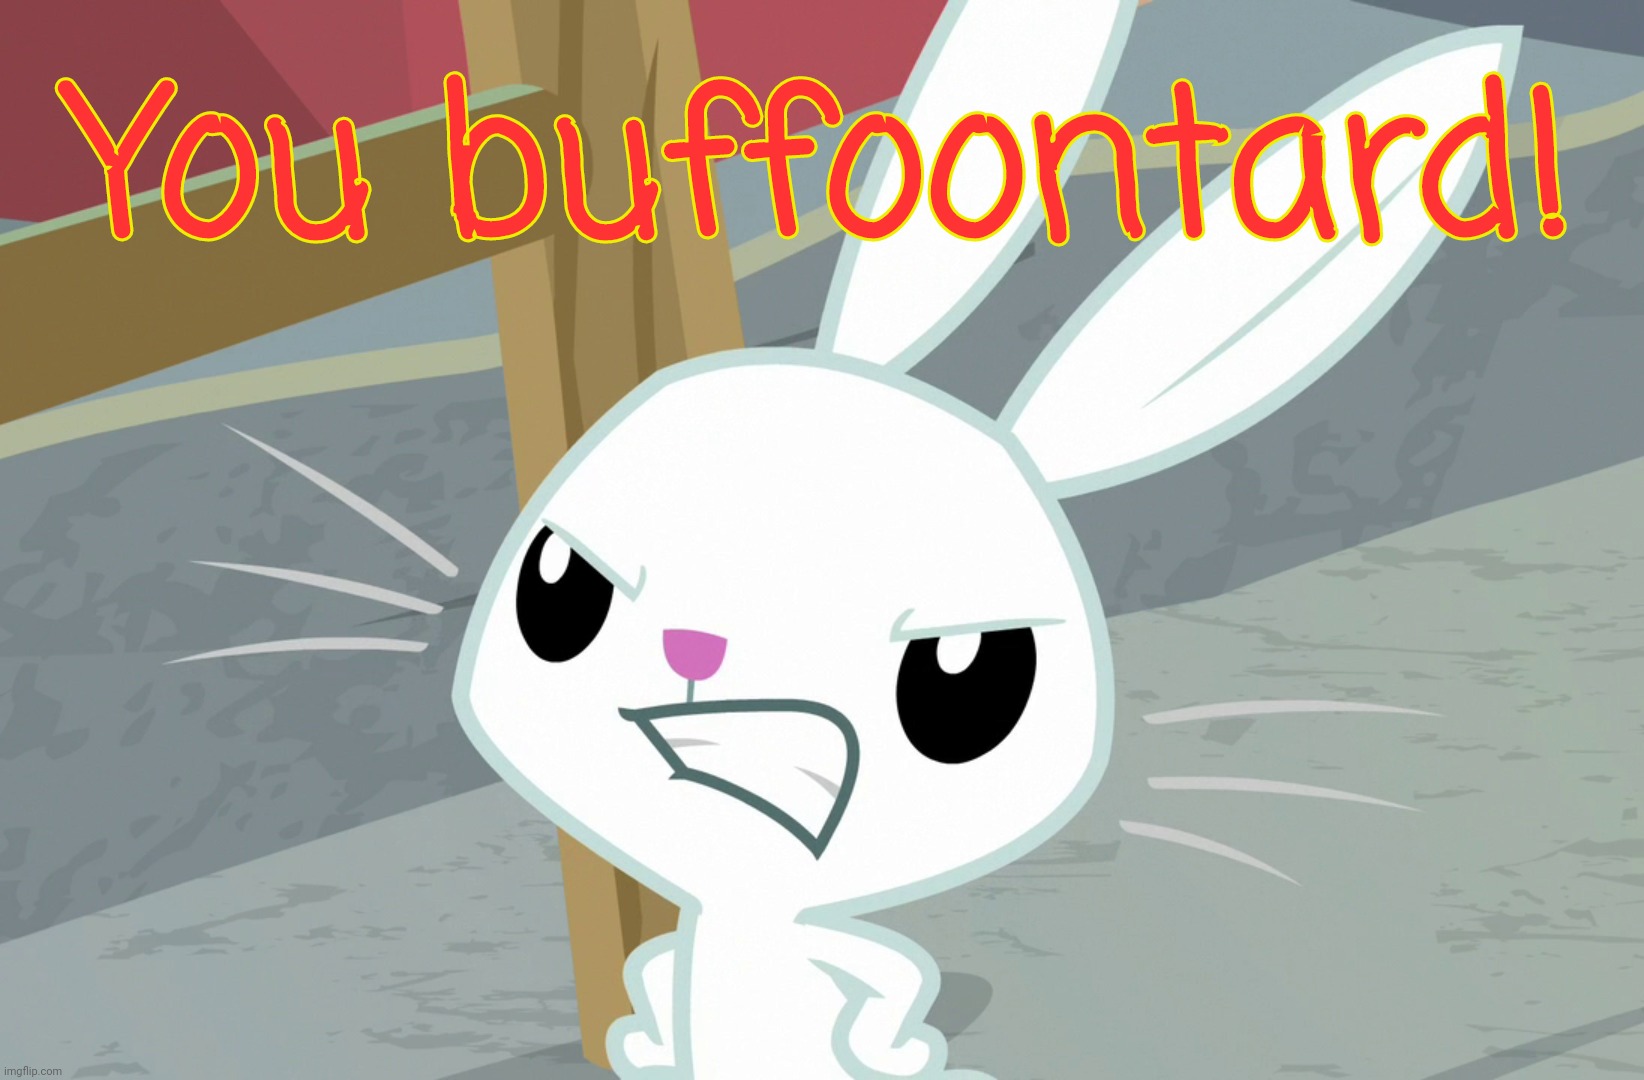 Pissed Angel Bunny | You buffoontard! | image tagged in pissed angel bunny | made w/ Imgflip meme maker